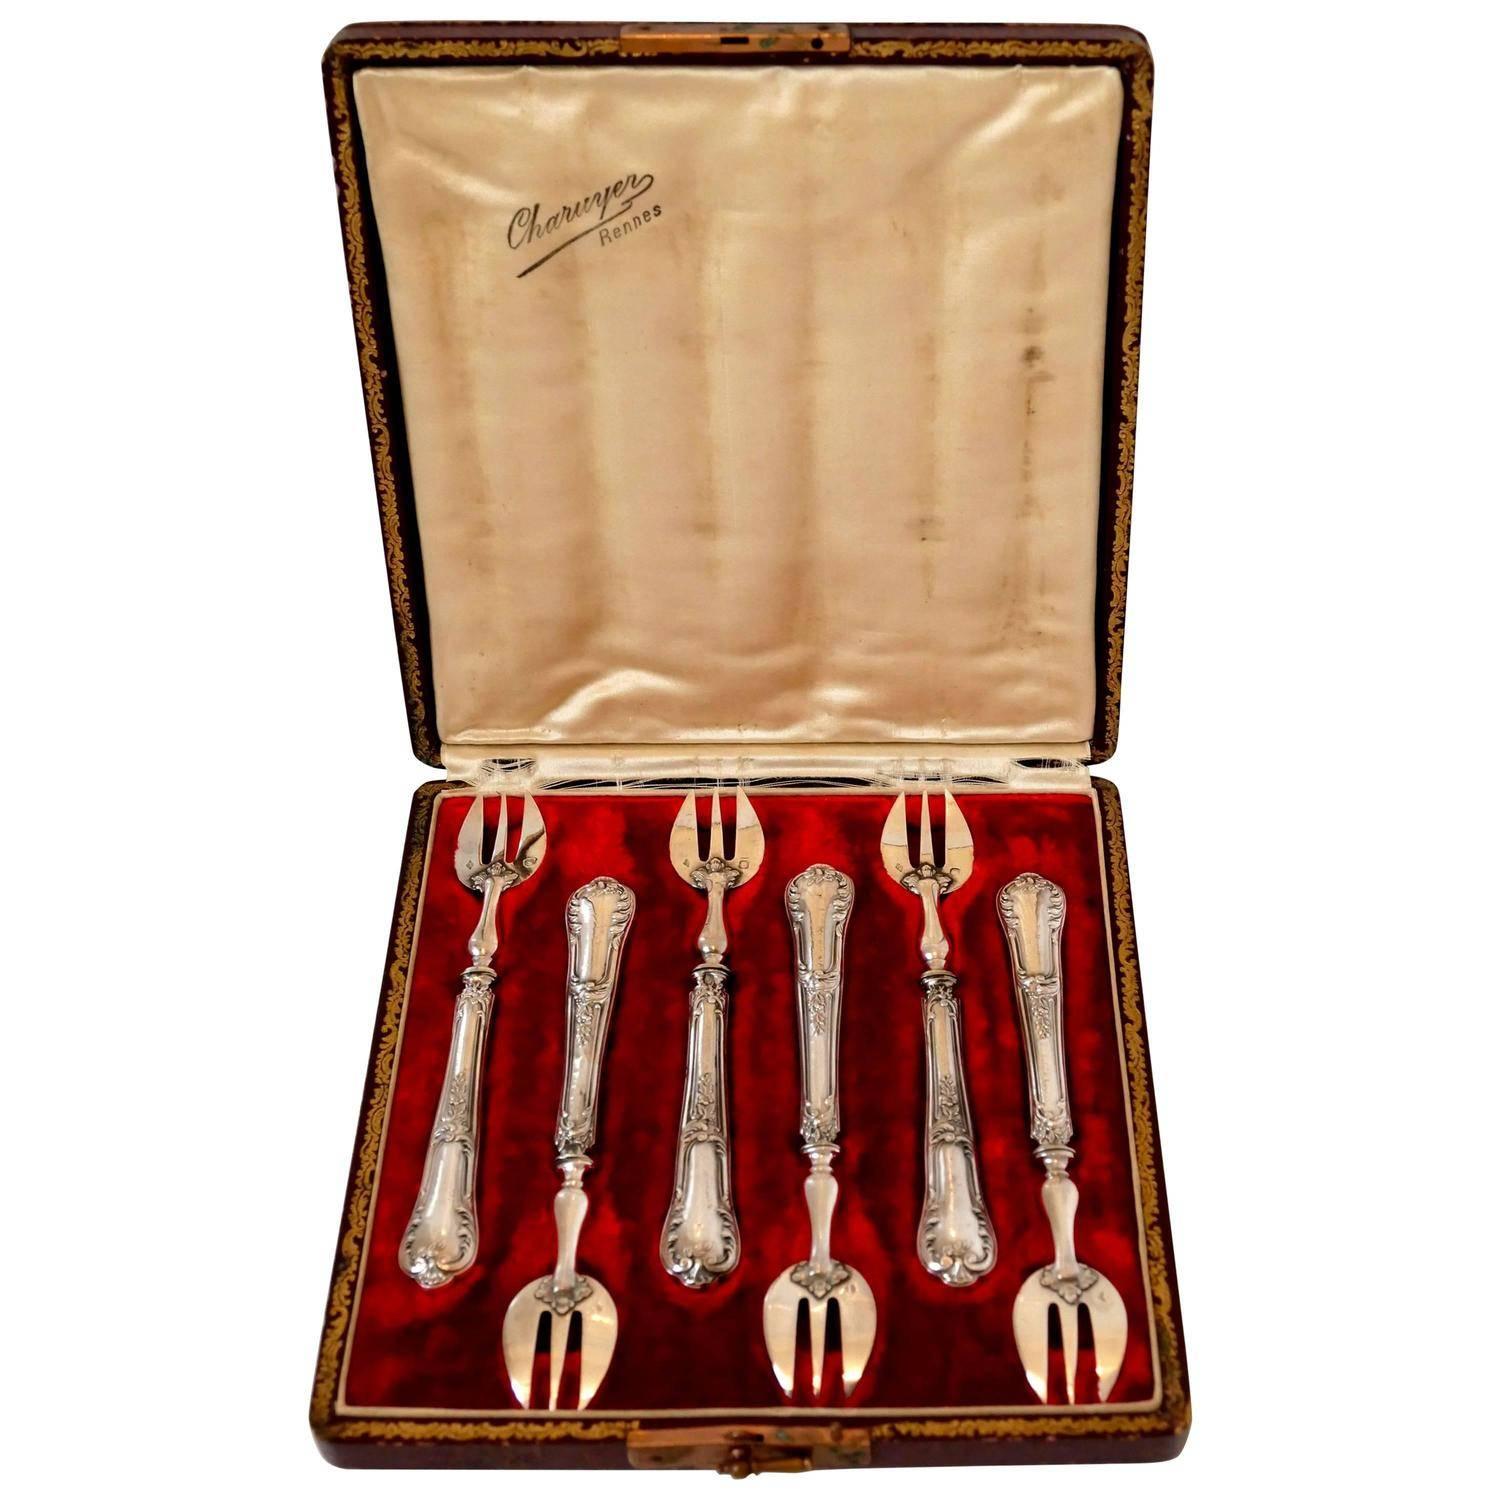 Coignet Antique French All Sterling Silver Oyster Forks Original Box